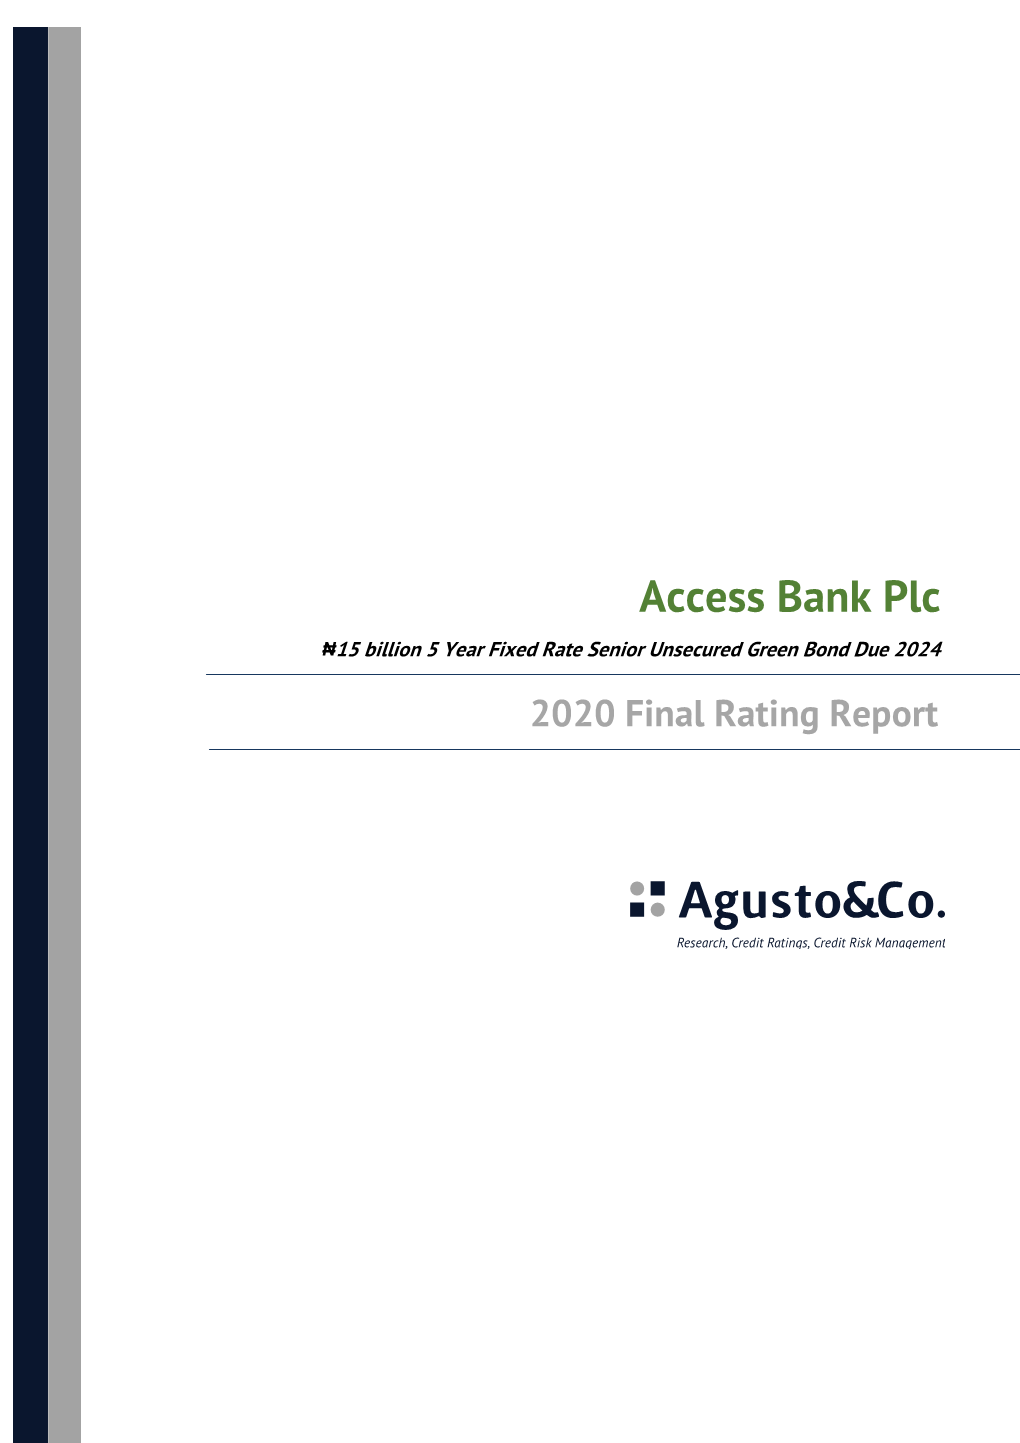 Access Bank Plc ₦15 Billion 5 Year Fixed Rate Senior Unsecured Green Bond Due 2024 2020 Final Rating Report